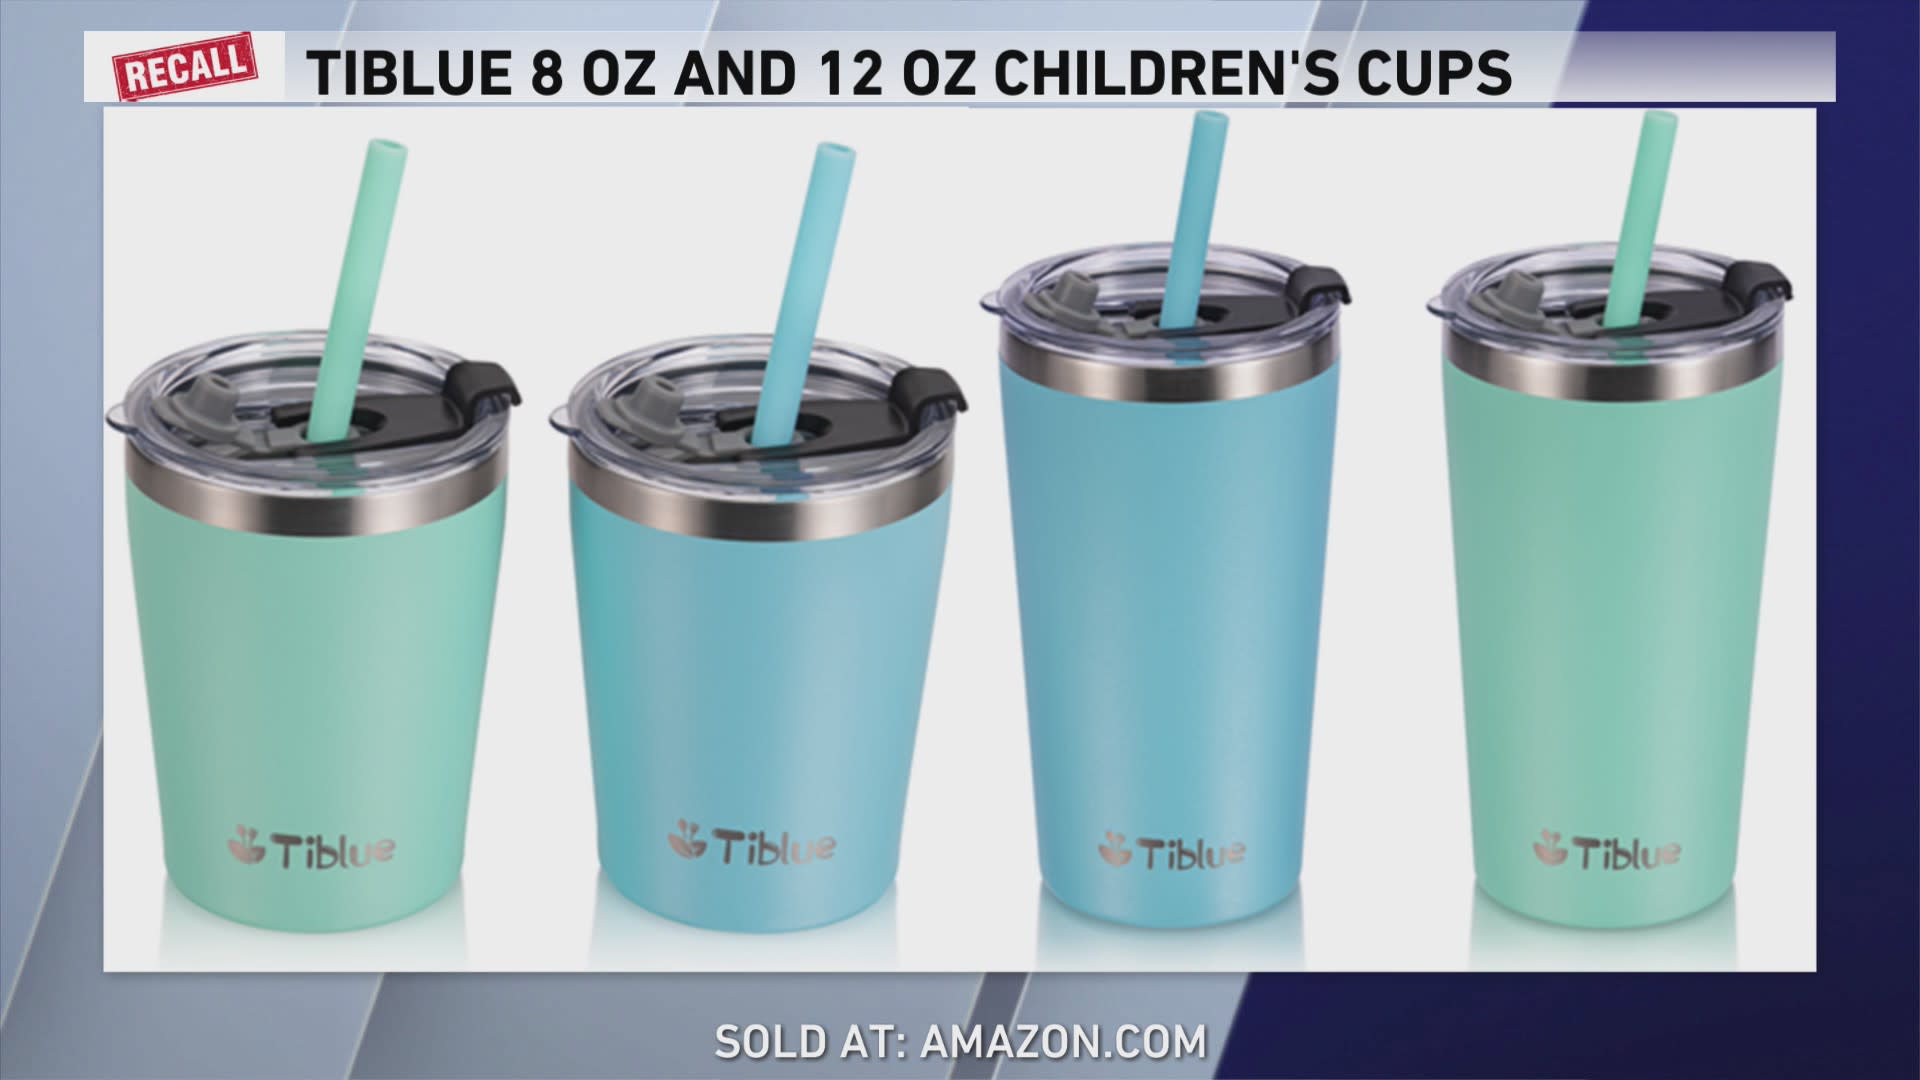 Children's drink cups: Brands recalled twice in two weeks for excessive lead